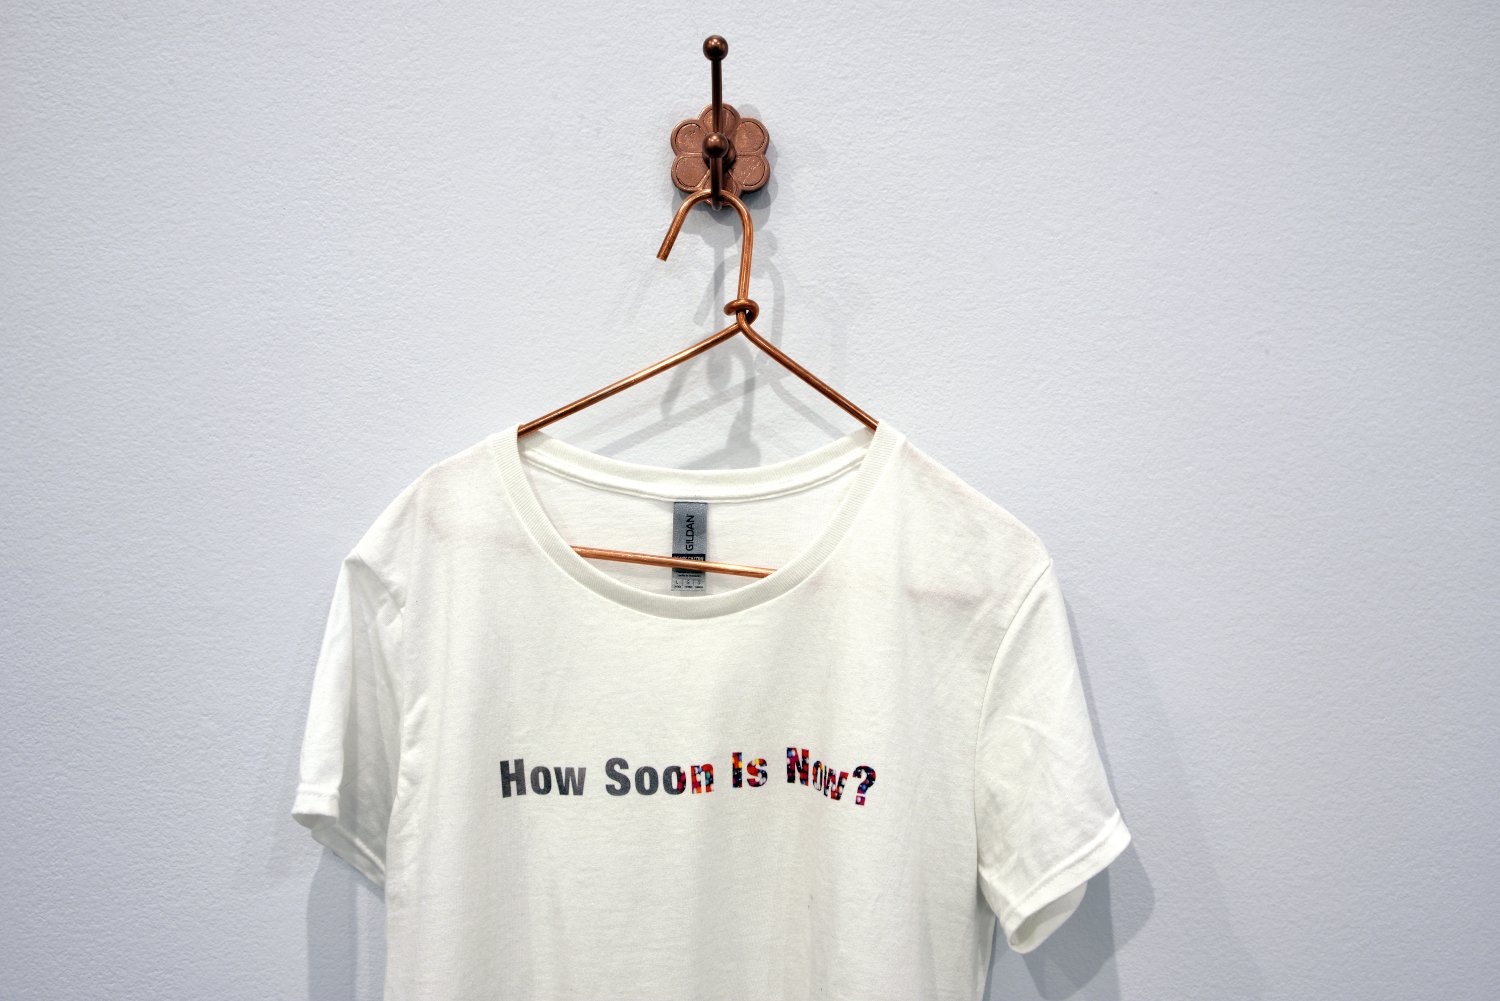   How soon is now?   T-shirt, 2023. Collection of the artist. 